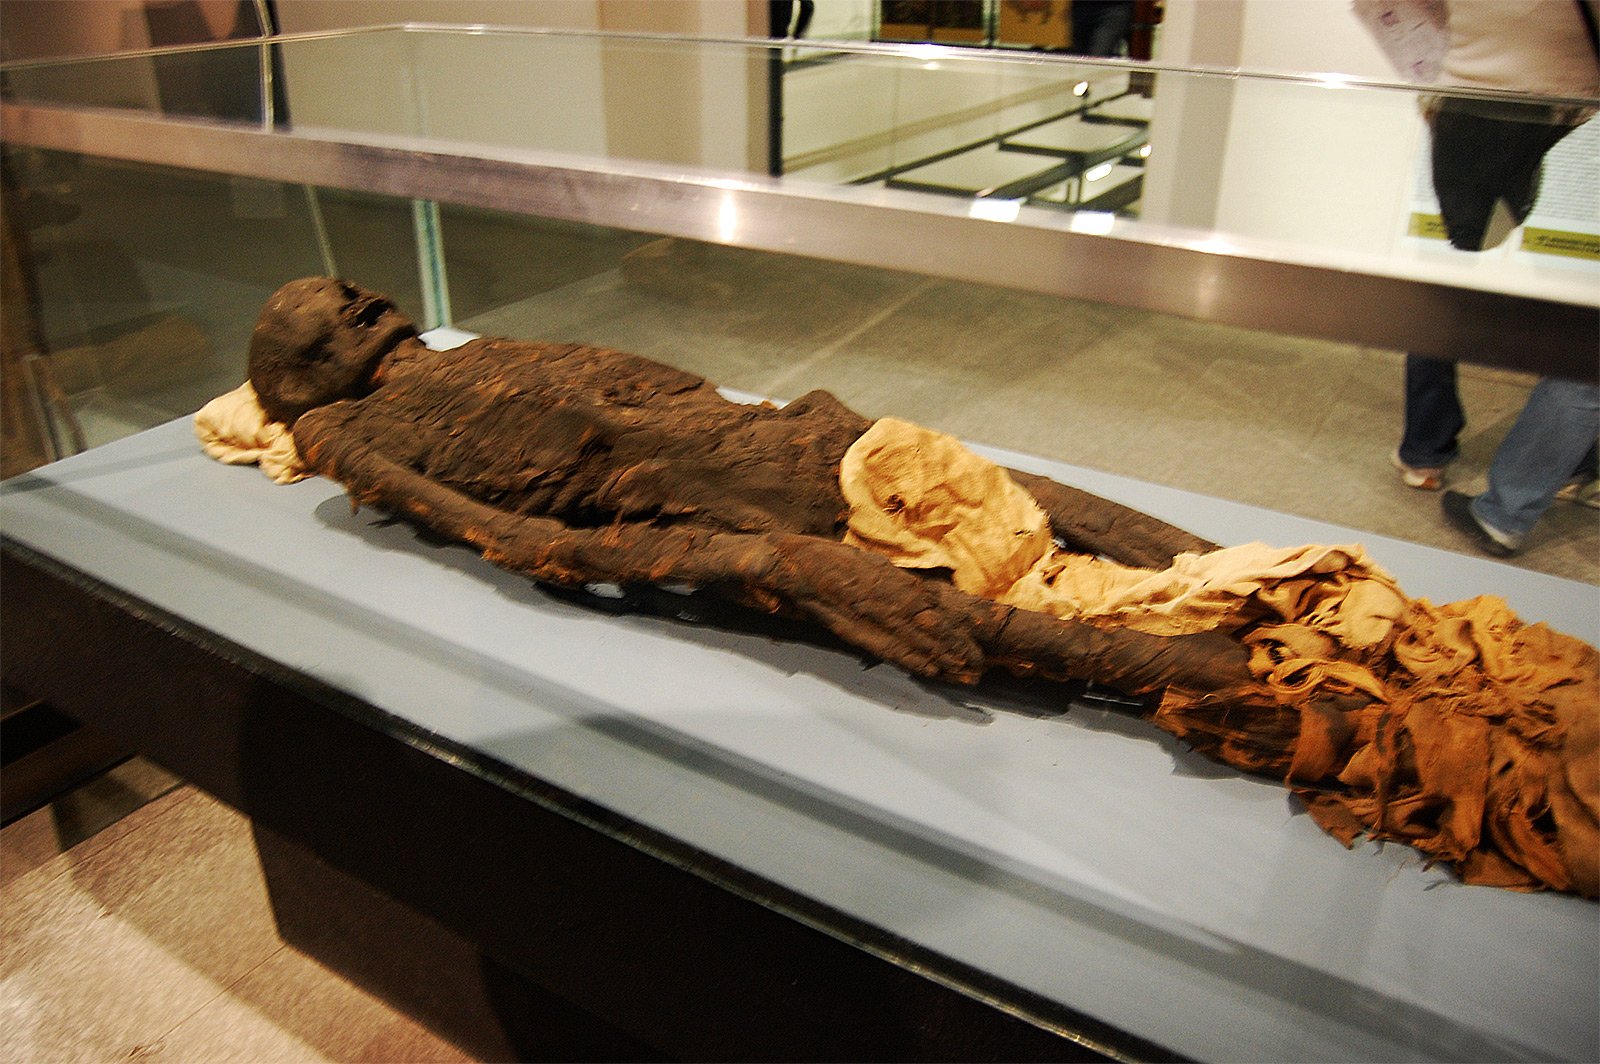 How to see Egyptian mummies in Milan